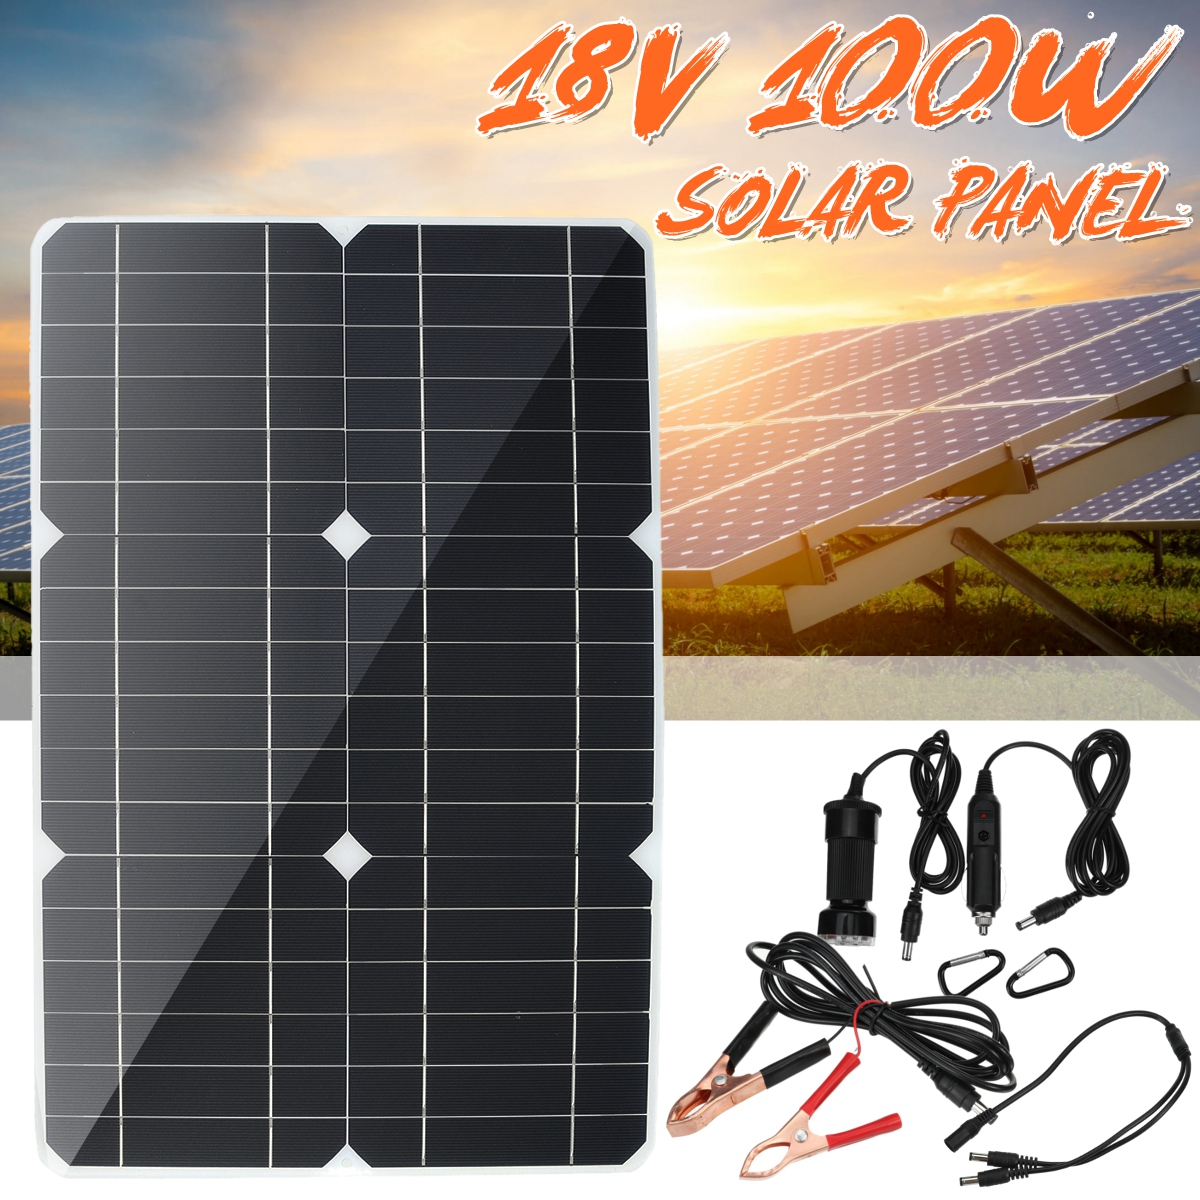 100W-18V-Solar-Panel-Monocrystalline-Silicon-Battery-Charger-Kit-for-Cycling-Climbing-Hiking-Camping-1778312-1